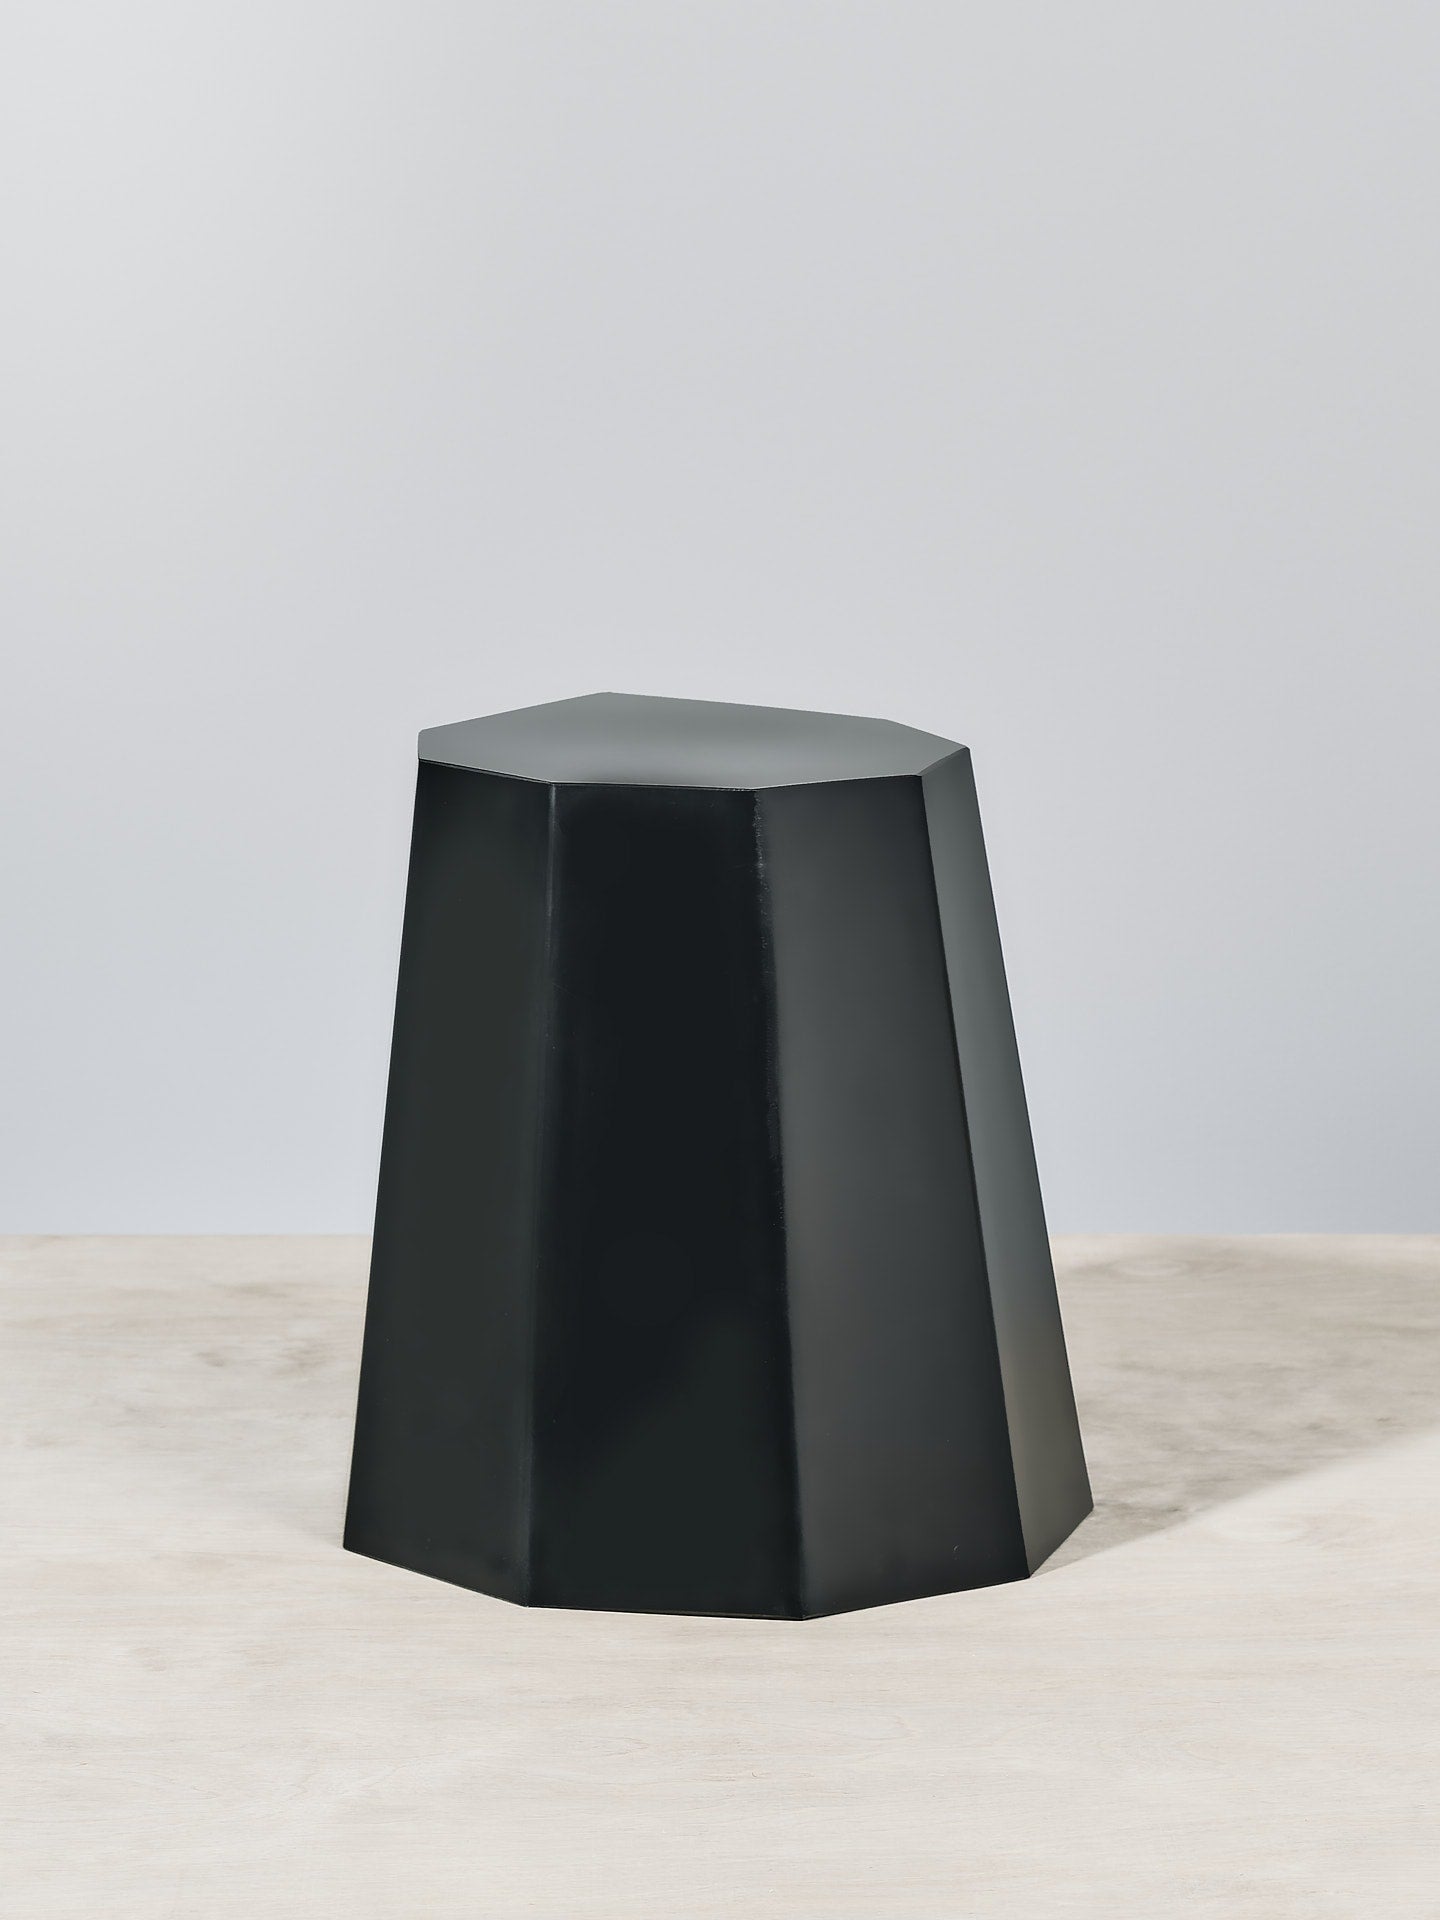 A Arnoldino Stool – Black by Martino Gamper on top of a wooden table.